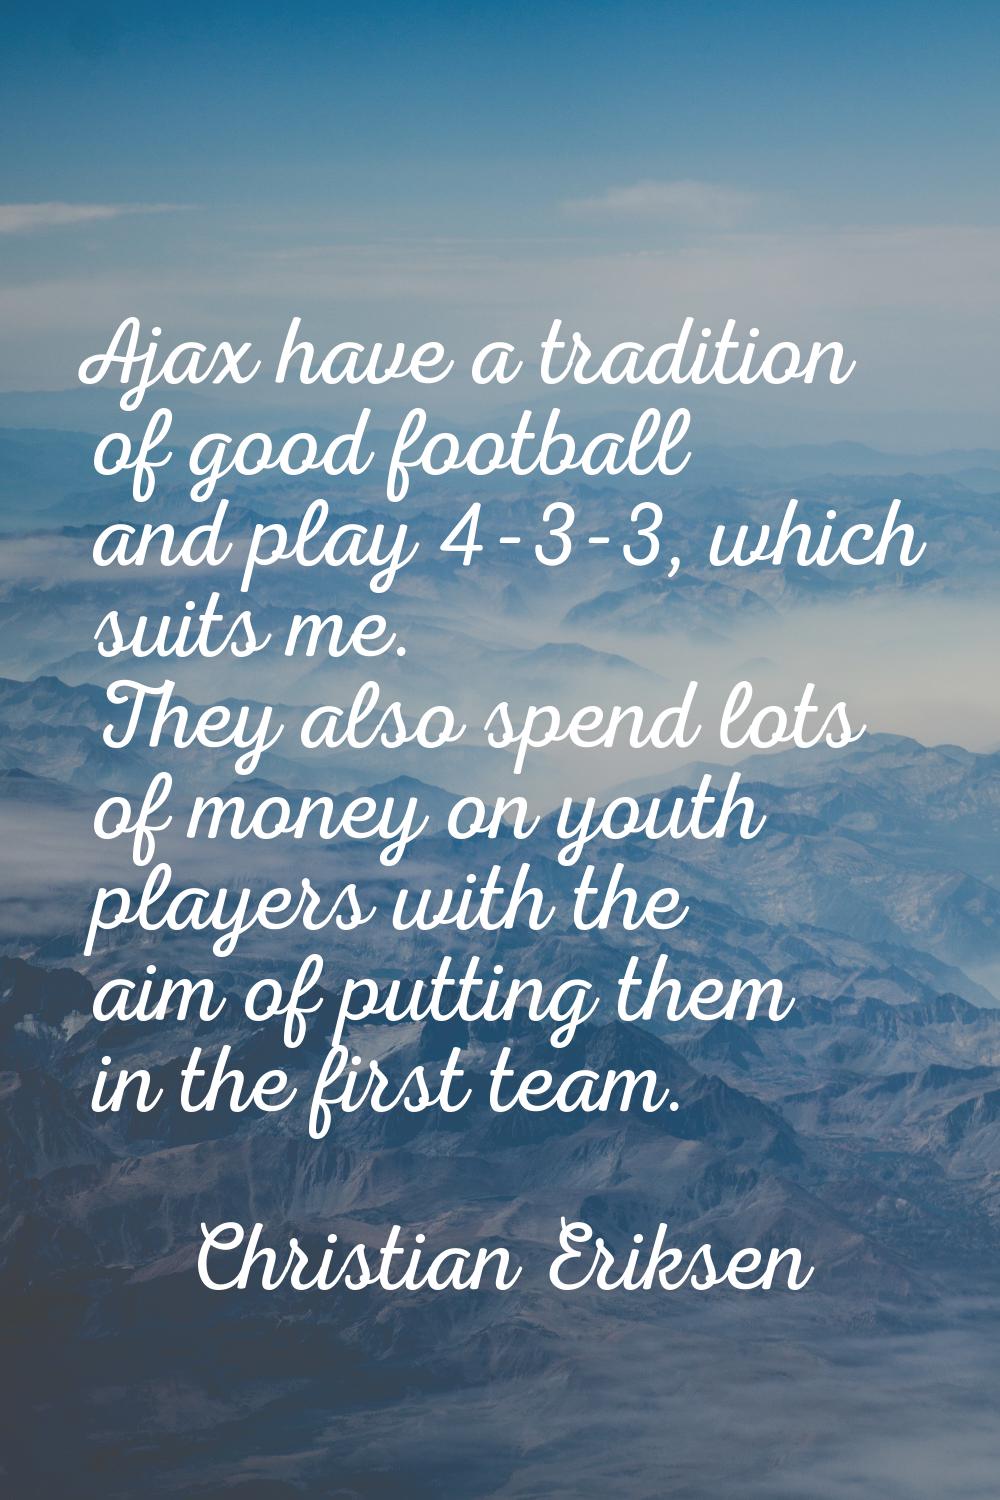 Ajax have a tradition of good football and play 4-3-3, which suits me. They also spend lots of mone